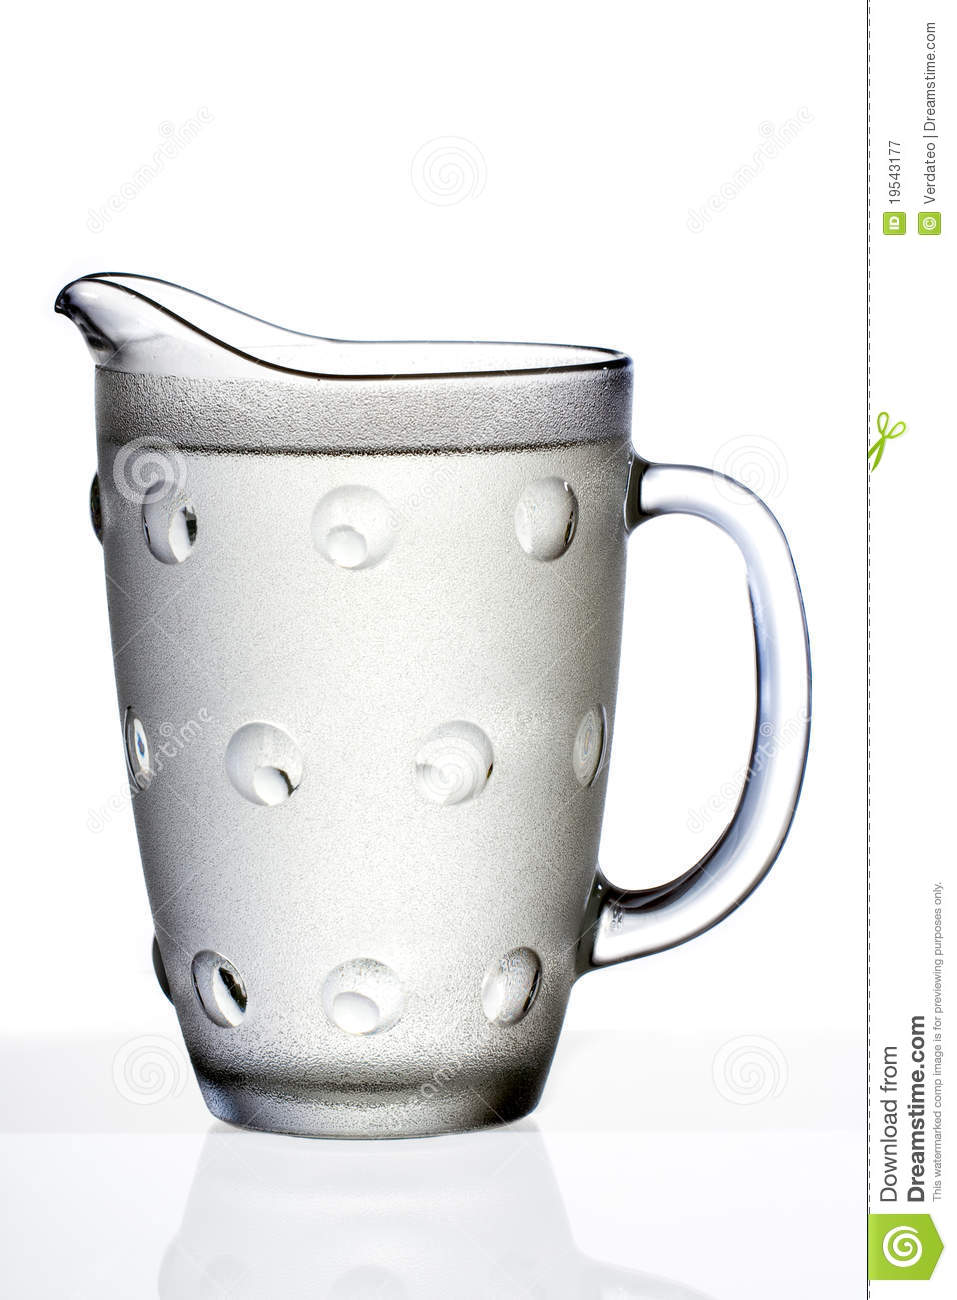 Jug Of Water Royalty Free Stock Photography   Image  19543177